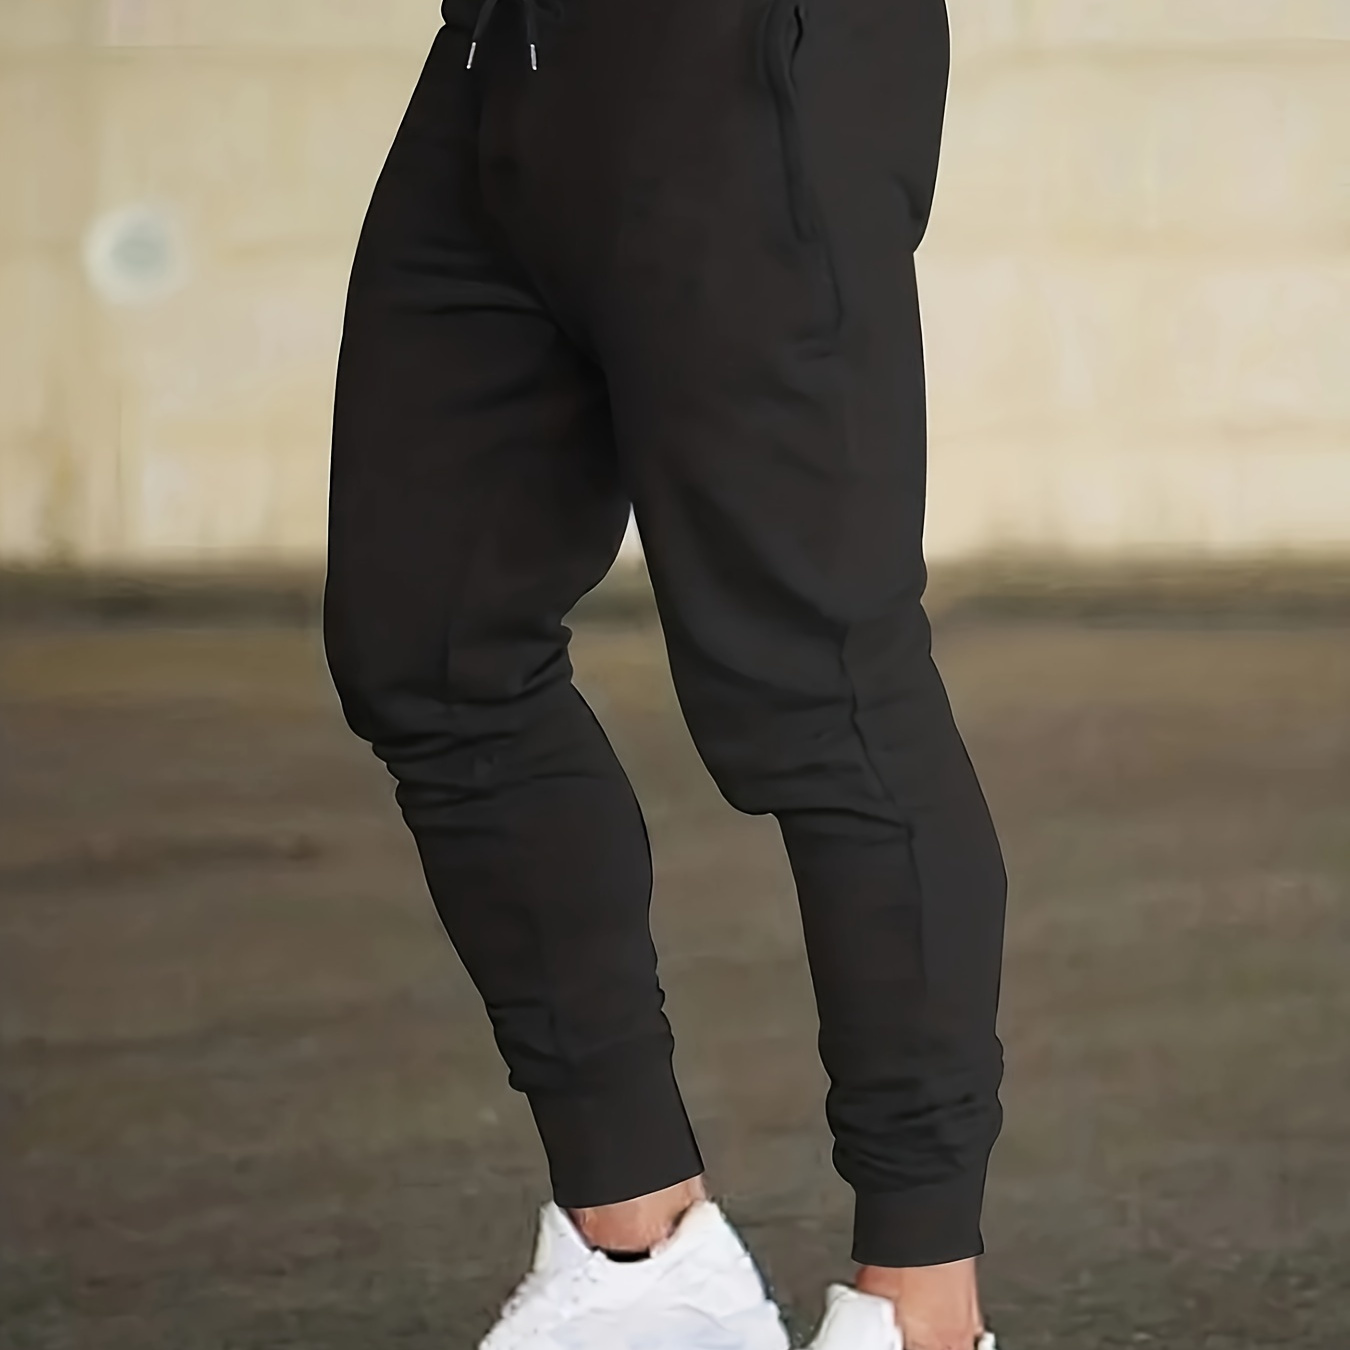 

Men's Solid Regular Fit And Cuffed Sweat Pants With Drawstring And Pockets, Versatile And Casual Sports Pants For Fitness And Outdoors Activities